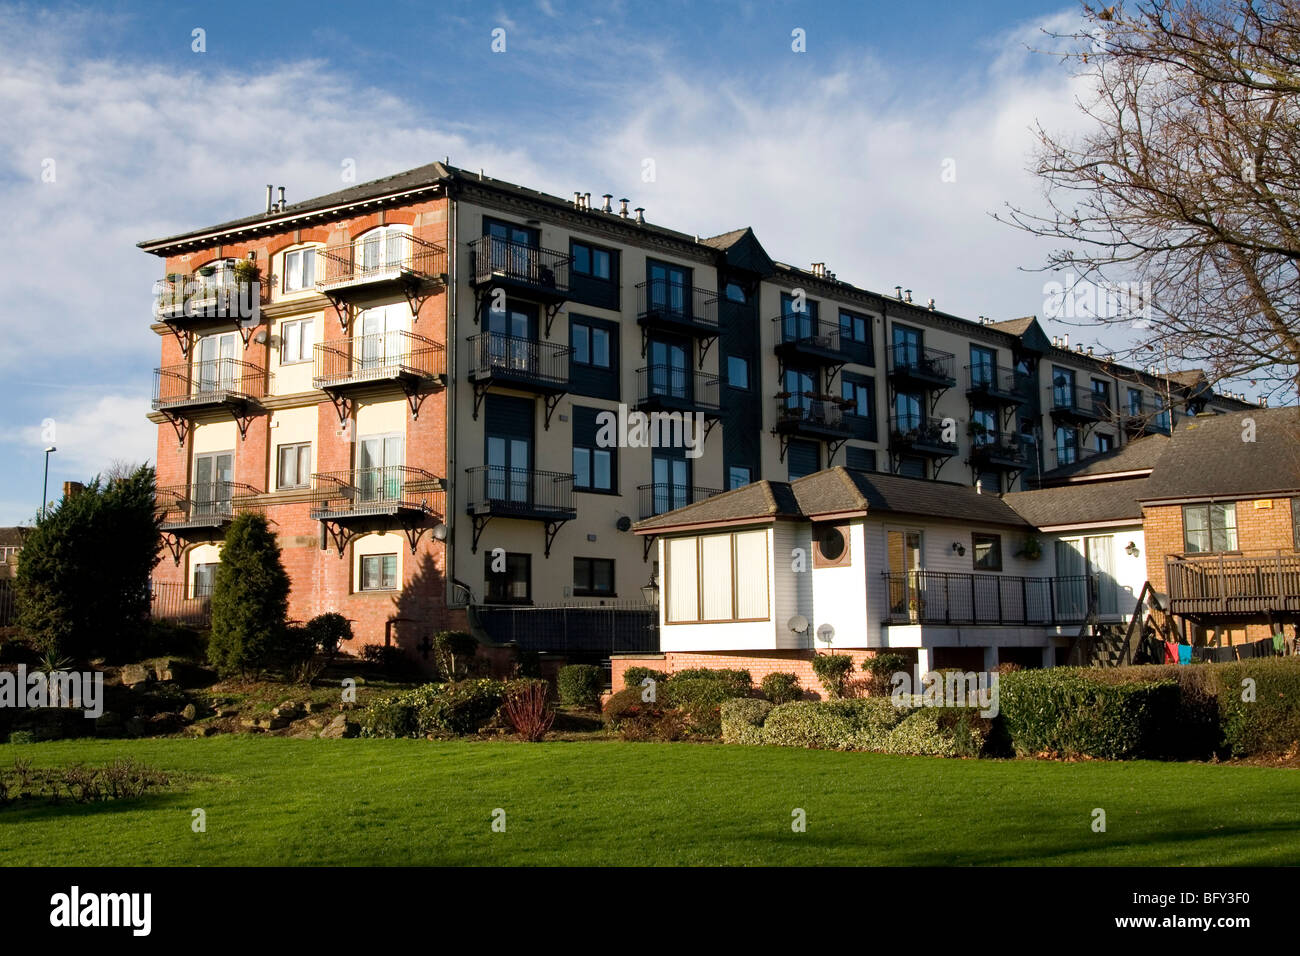 Apartments on the banks of the River Trent in West Bridgeford Stock Photo